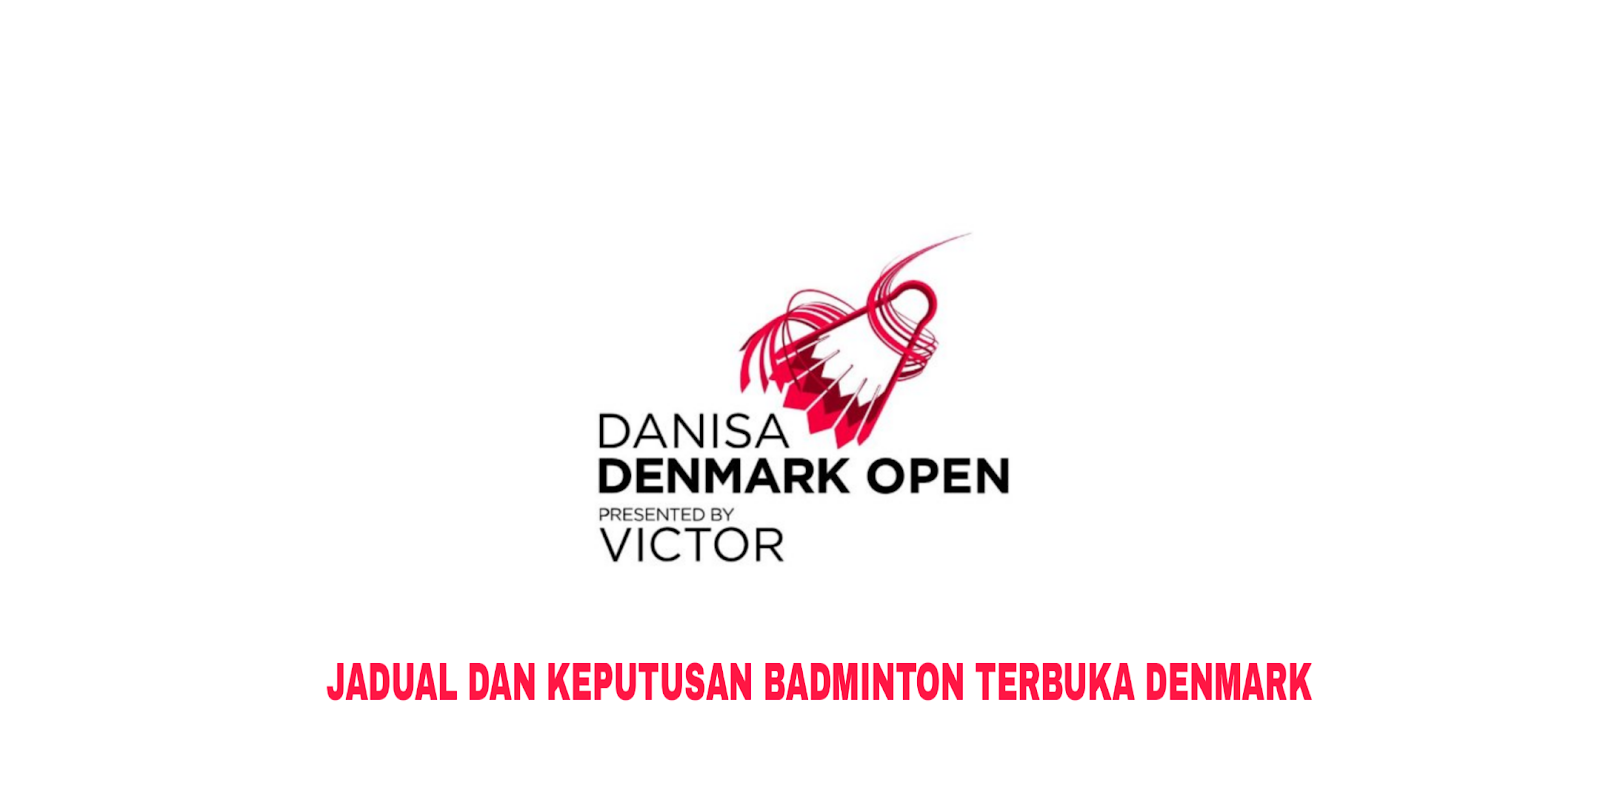 Malaysia schedule denmark time open OOCL